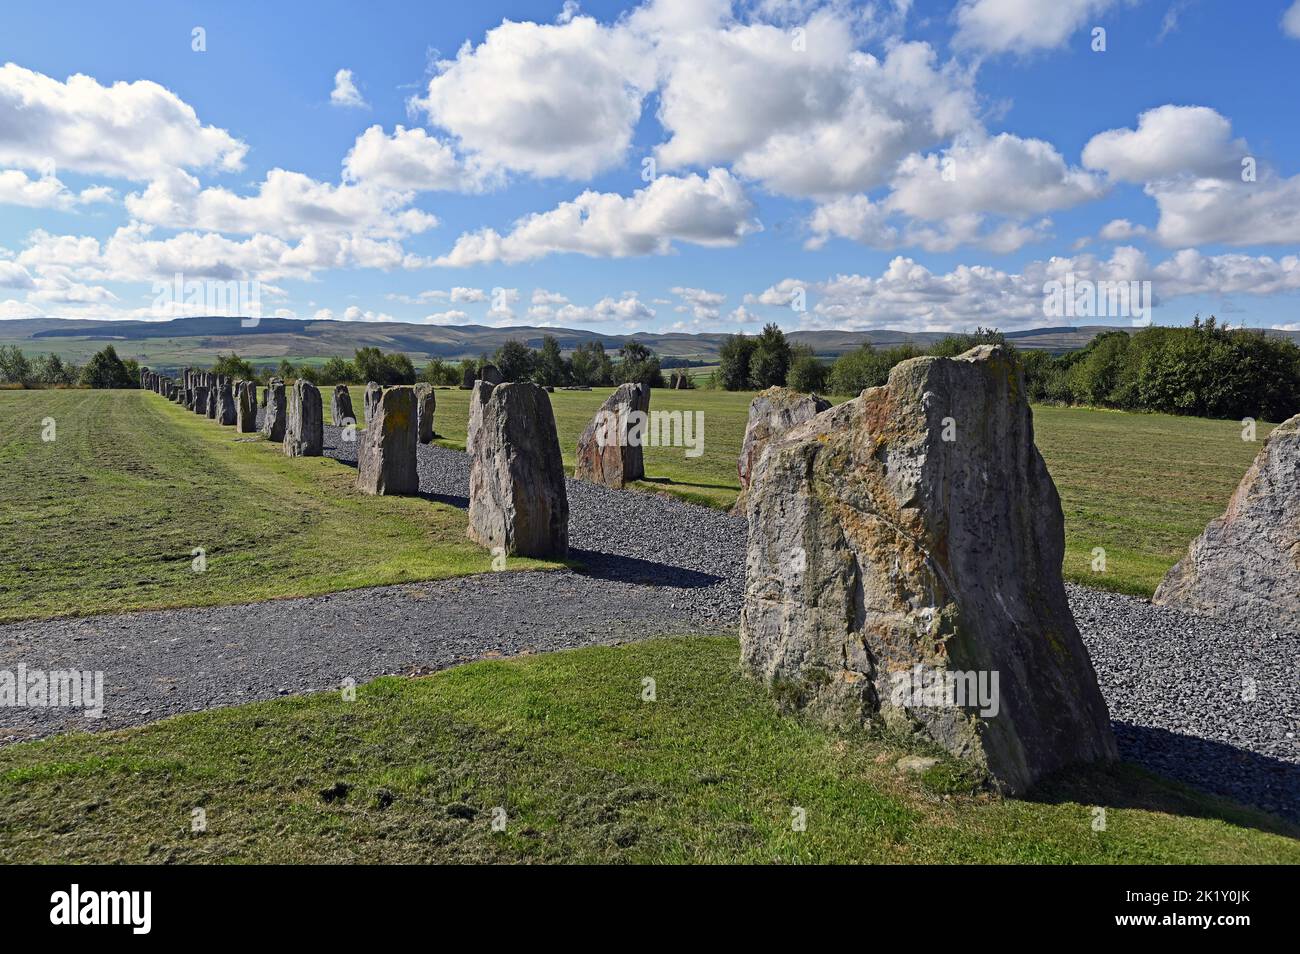 'North-South Line'. Outdoor artwork by Charles Jencks. Crawick Multiverse, Sanquhar, Dumfries and Galloway, Scotland, United Kingdom, Europe. Stock Photo